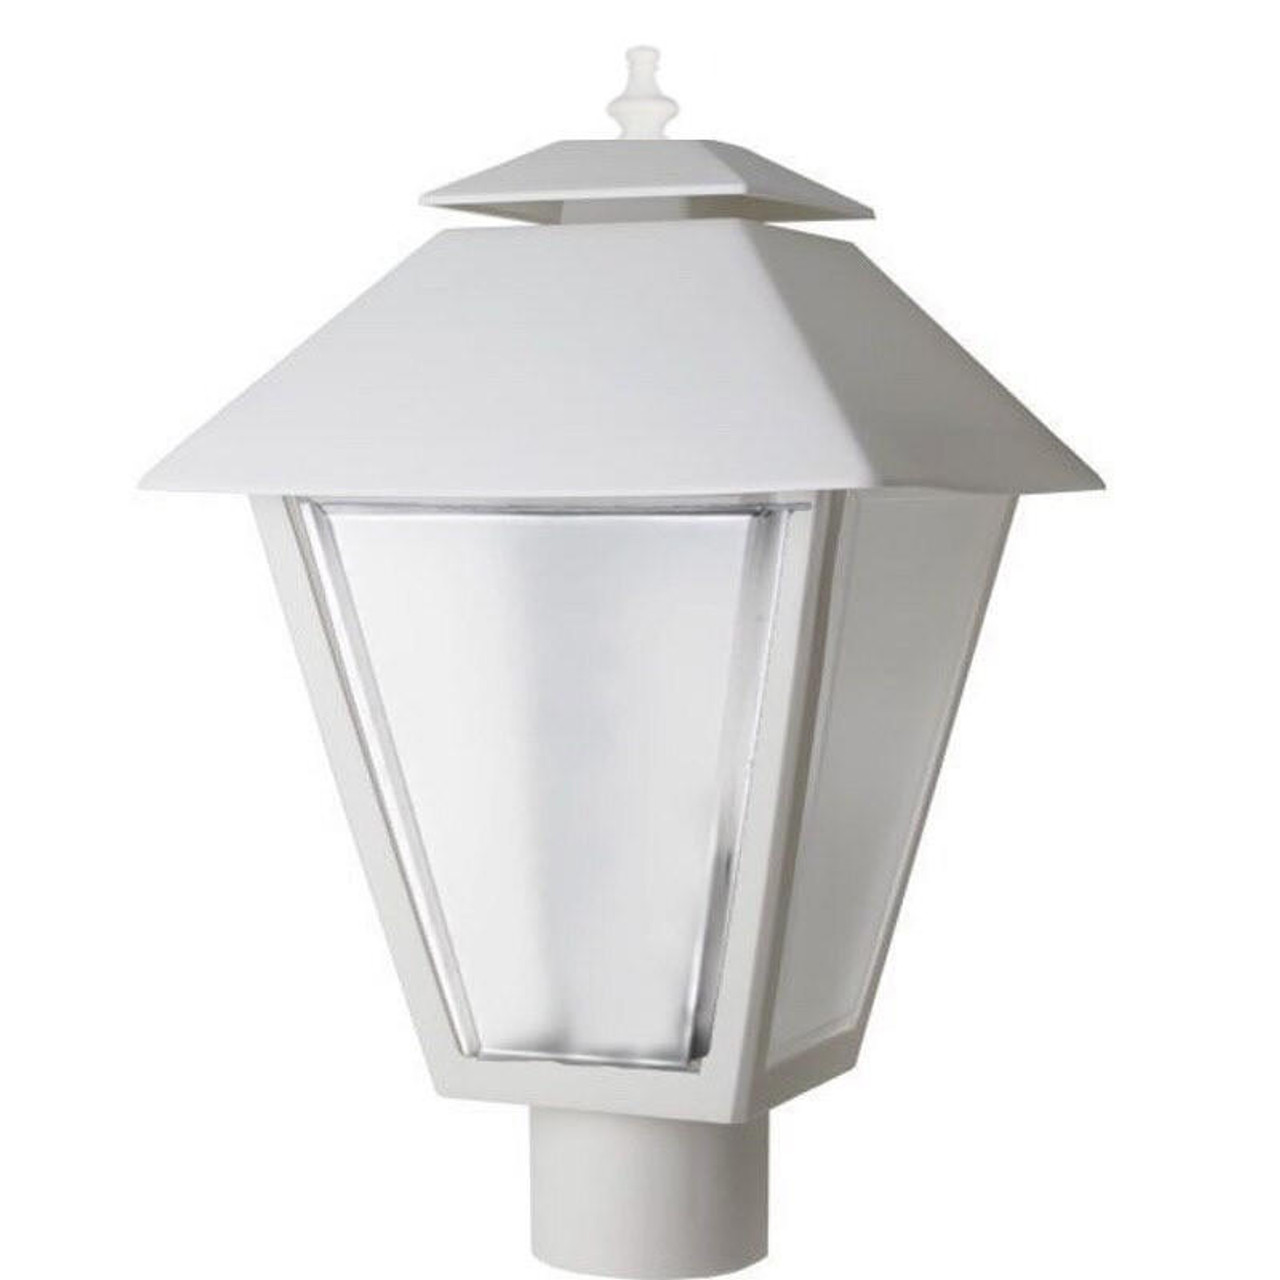 https://cdn11.bigcommerce.com/s-o7p3kkw0ib/images/stencil/1280x1280/products/48258/149341/incon-lighting-white-coach-lantern-post-top-outdoor-light-fixture__71835.1678556939.jpg?c=2